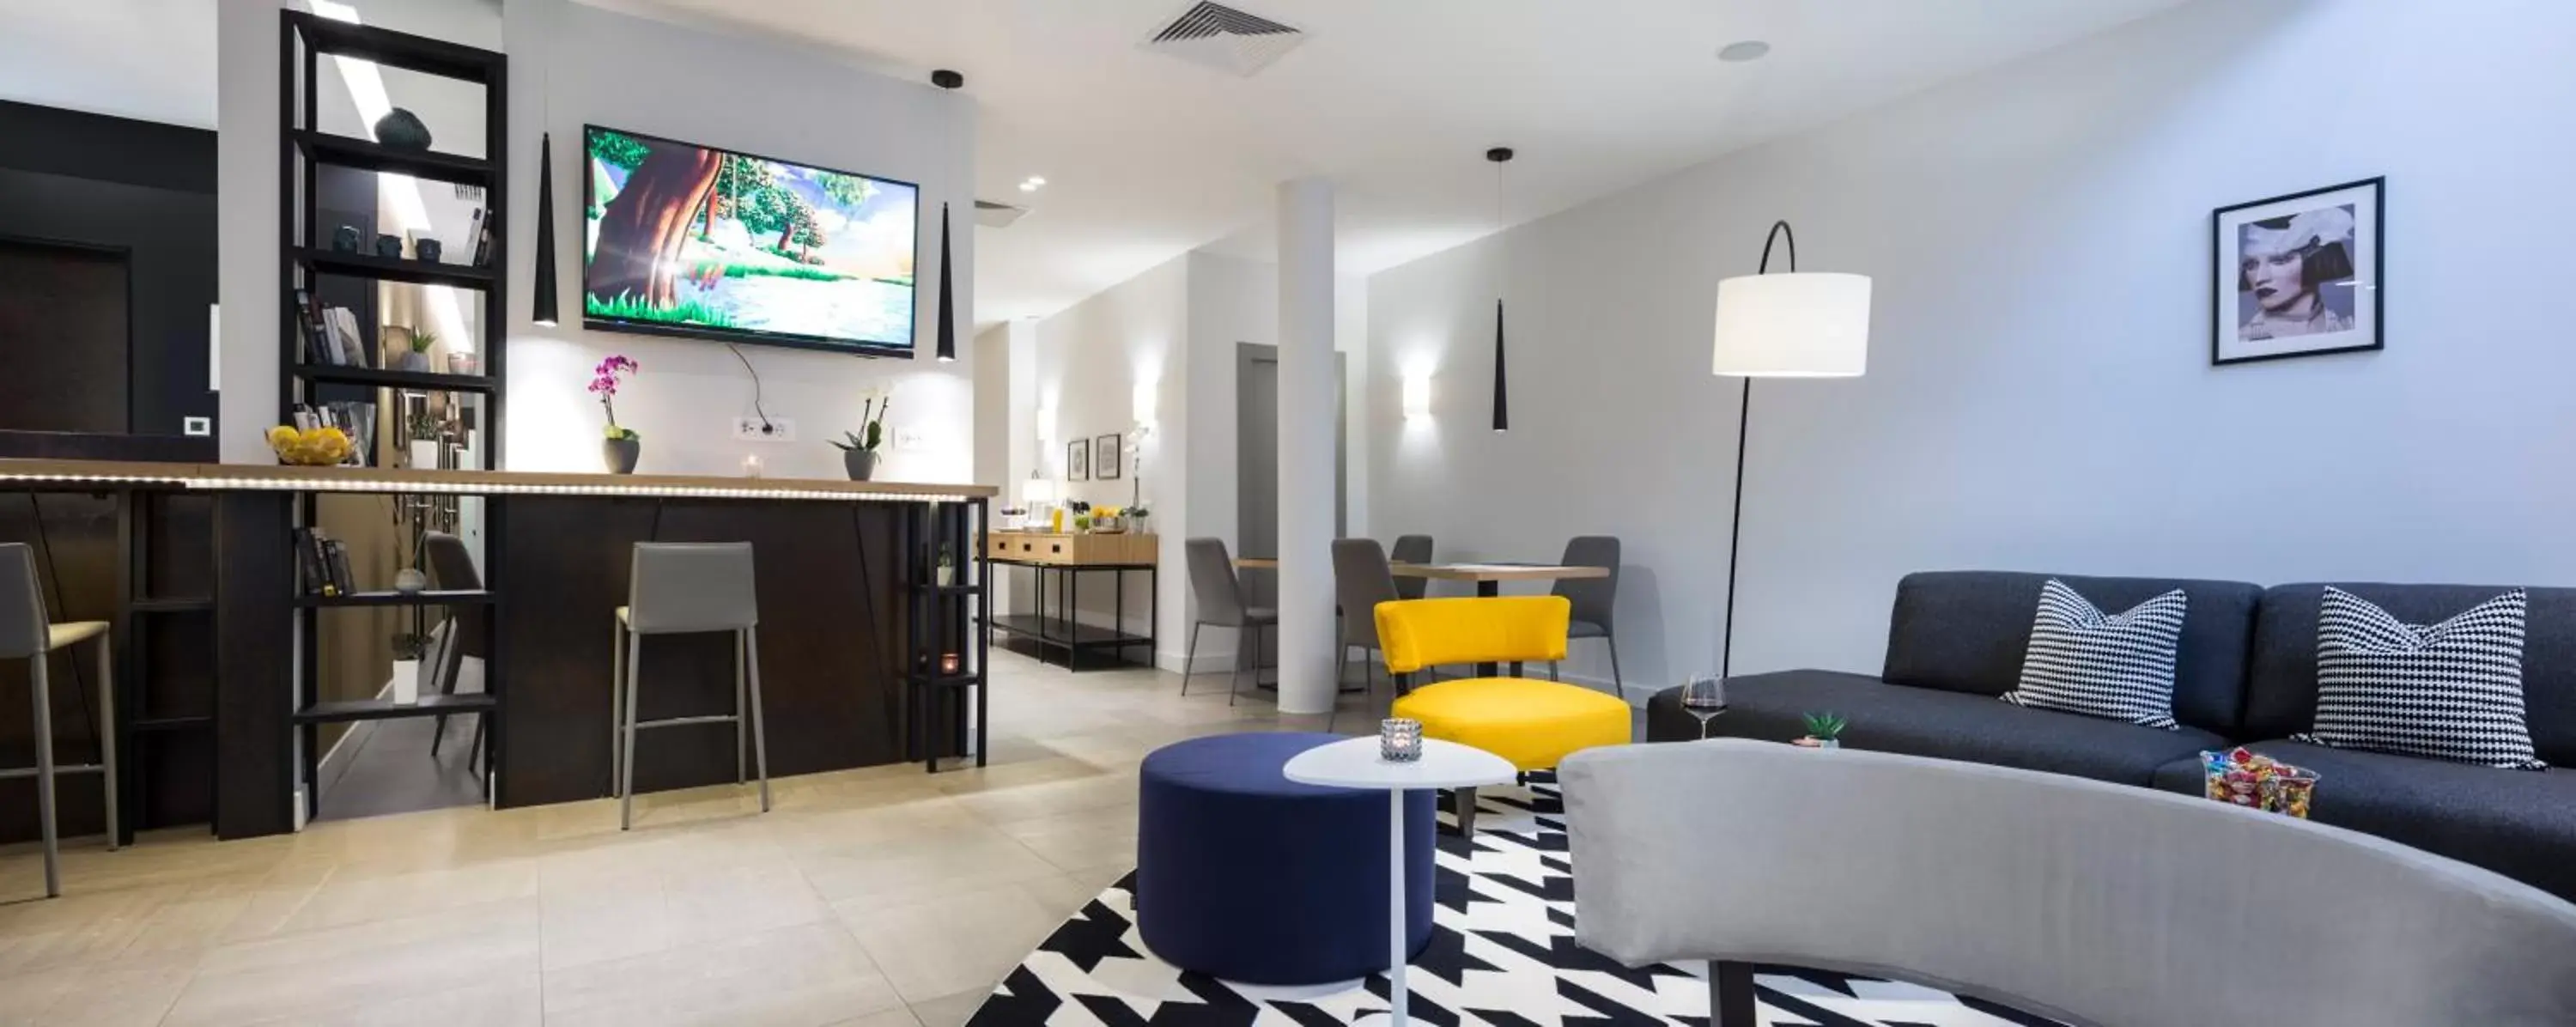 Lounge or bar, Seating Area in Livris Hotel